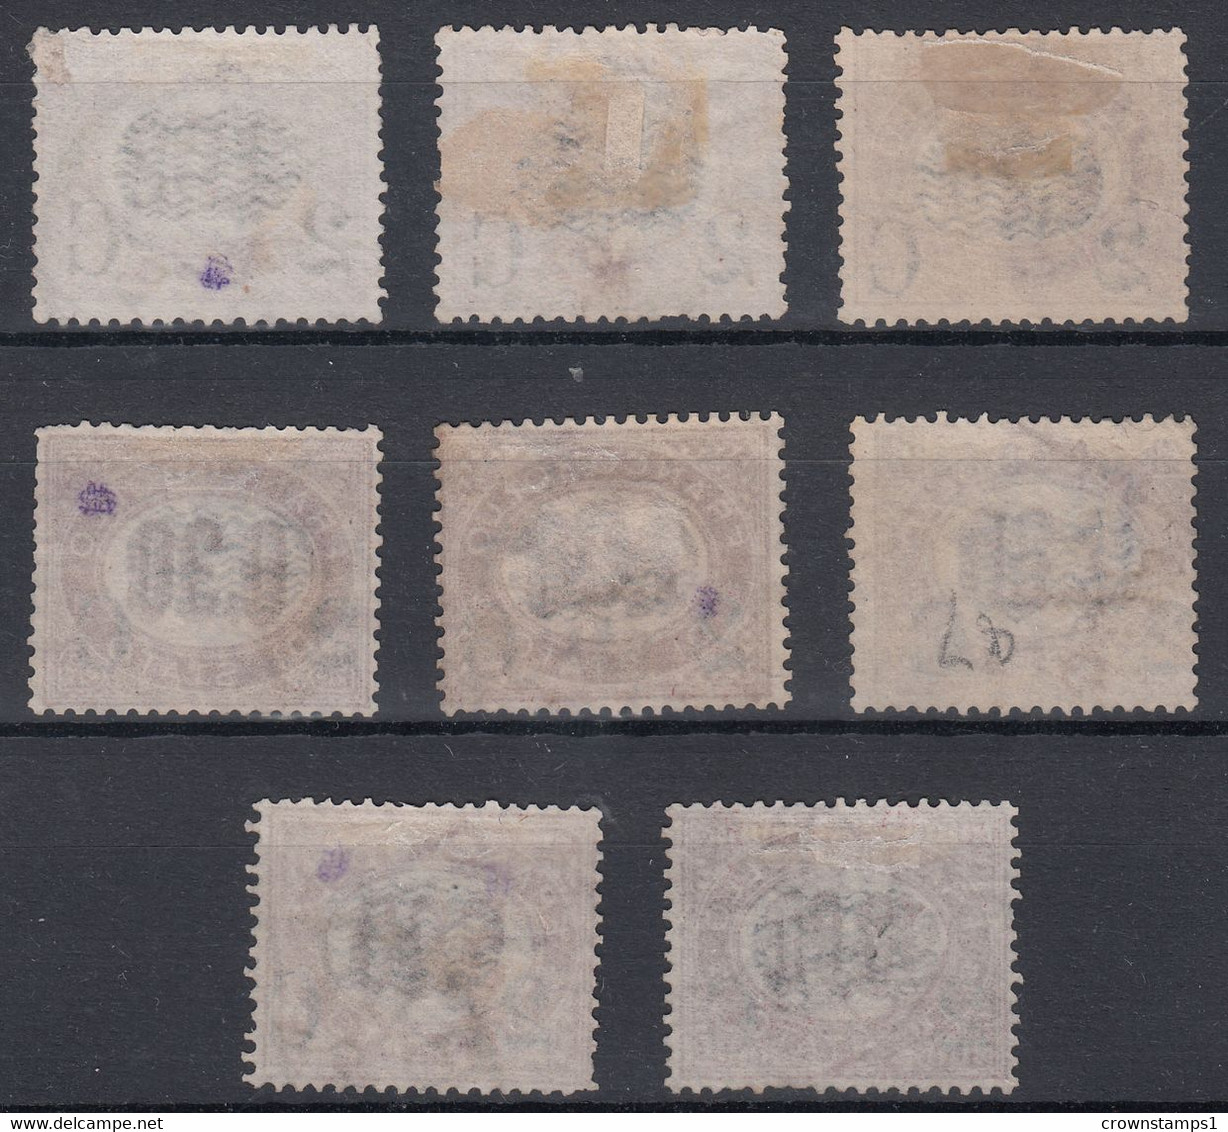 1877 ITALY OFFICIAL STAMPS SURCHARGED IN BLUE (YVERT# 25-32) USED FINE - Dienstmarken